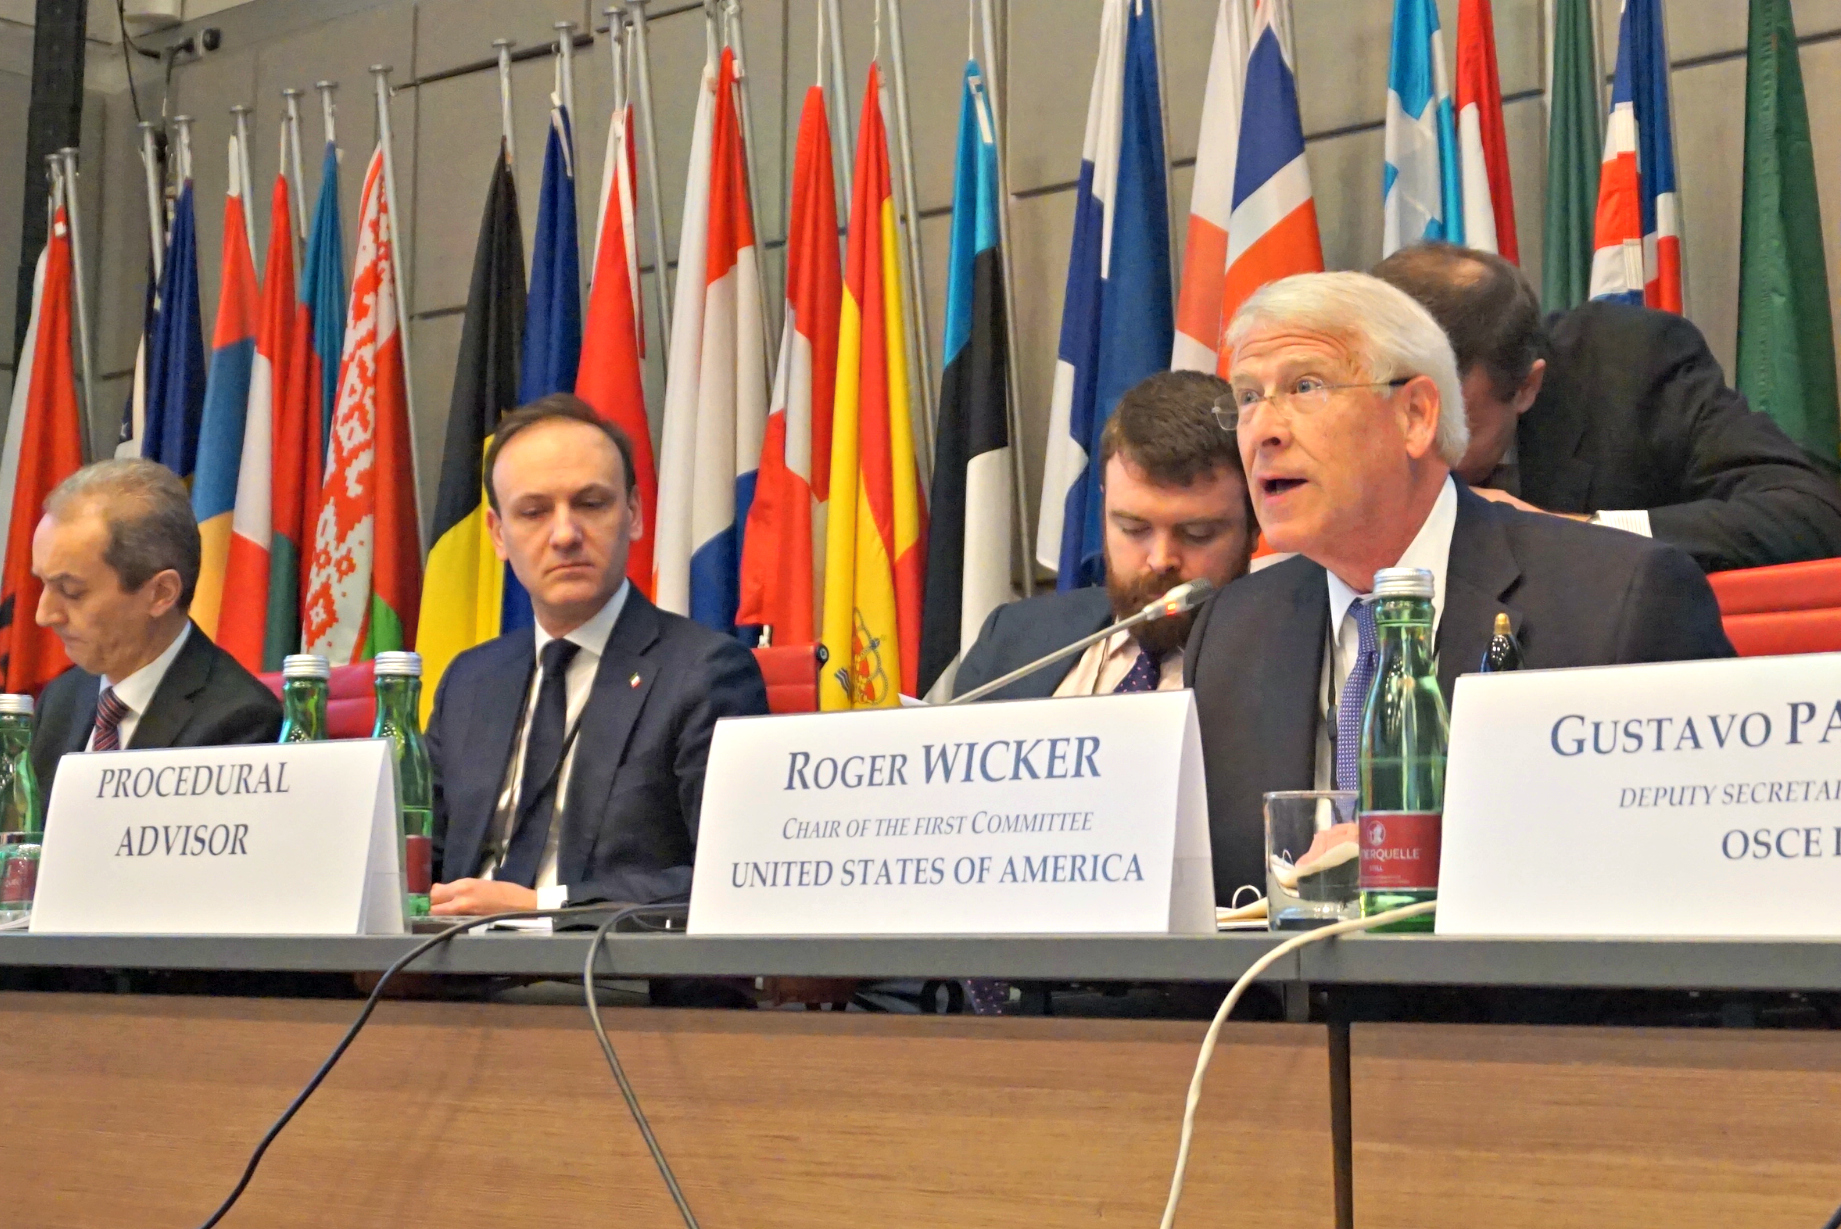 Senator Roger Wicker chairing the First Committee meeting at the 2017 OSCE PA Winter Meeting in Vienna